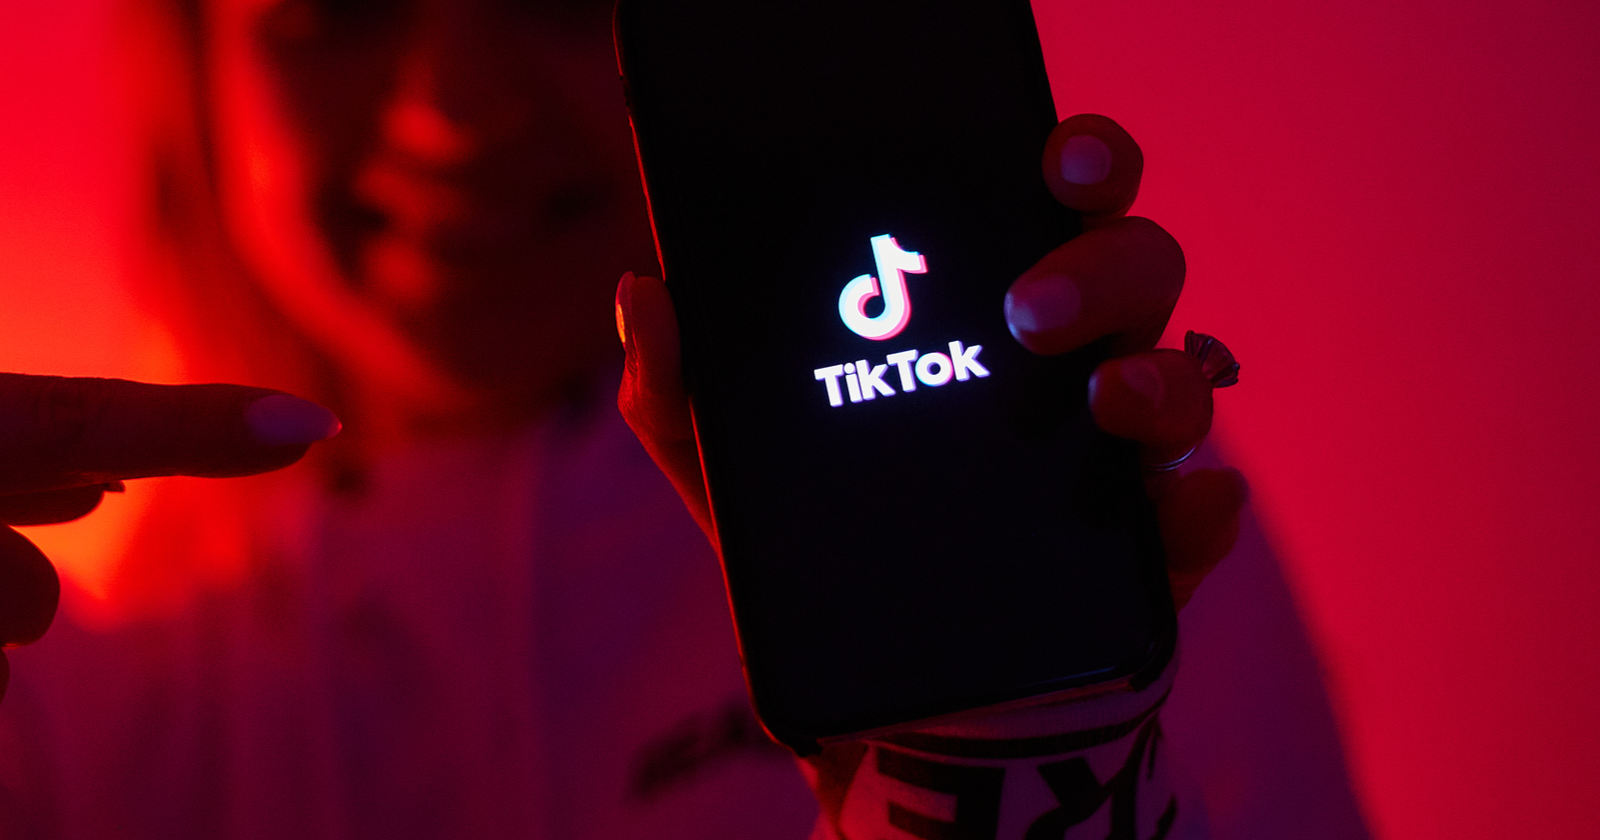 Why to choose Tiktok for your business?